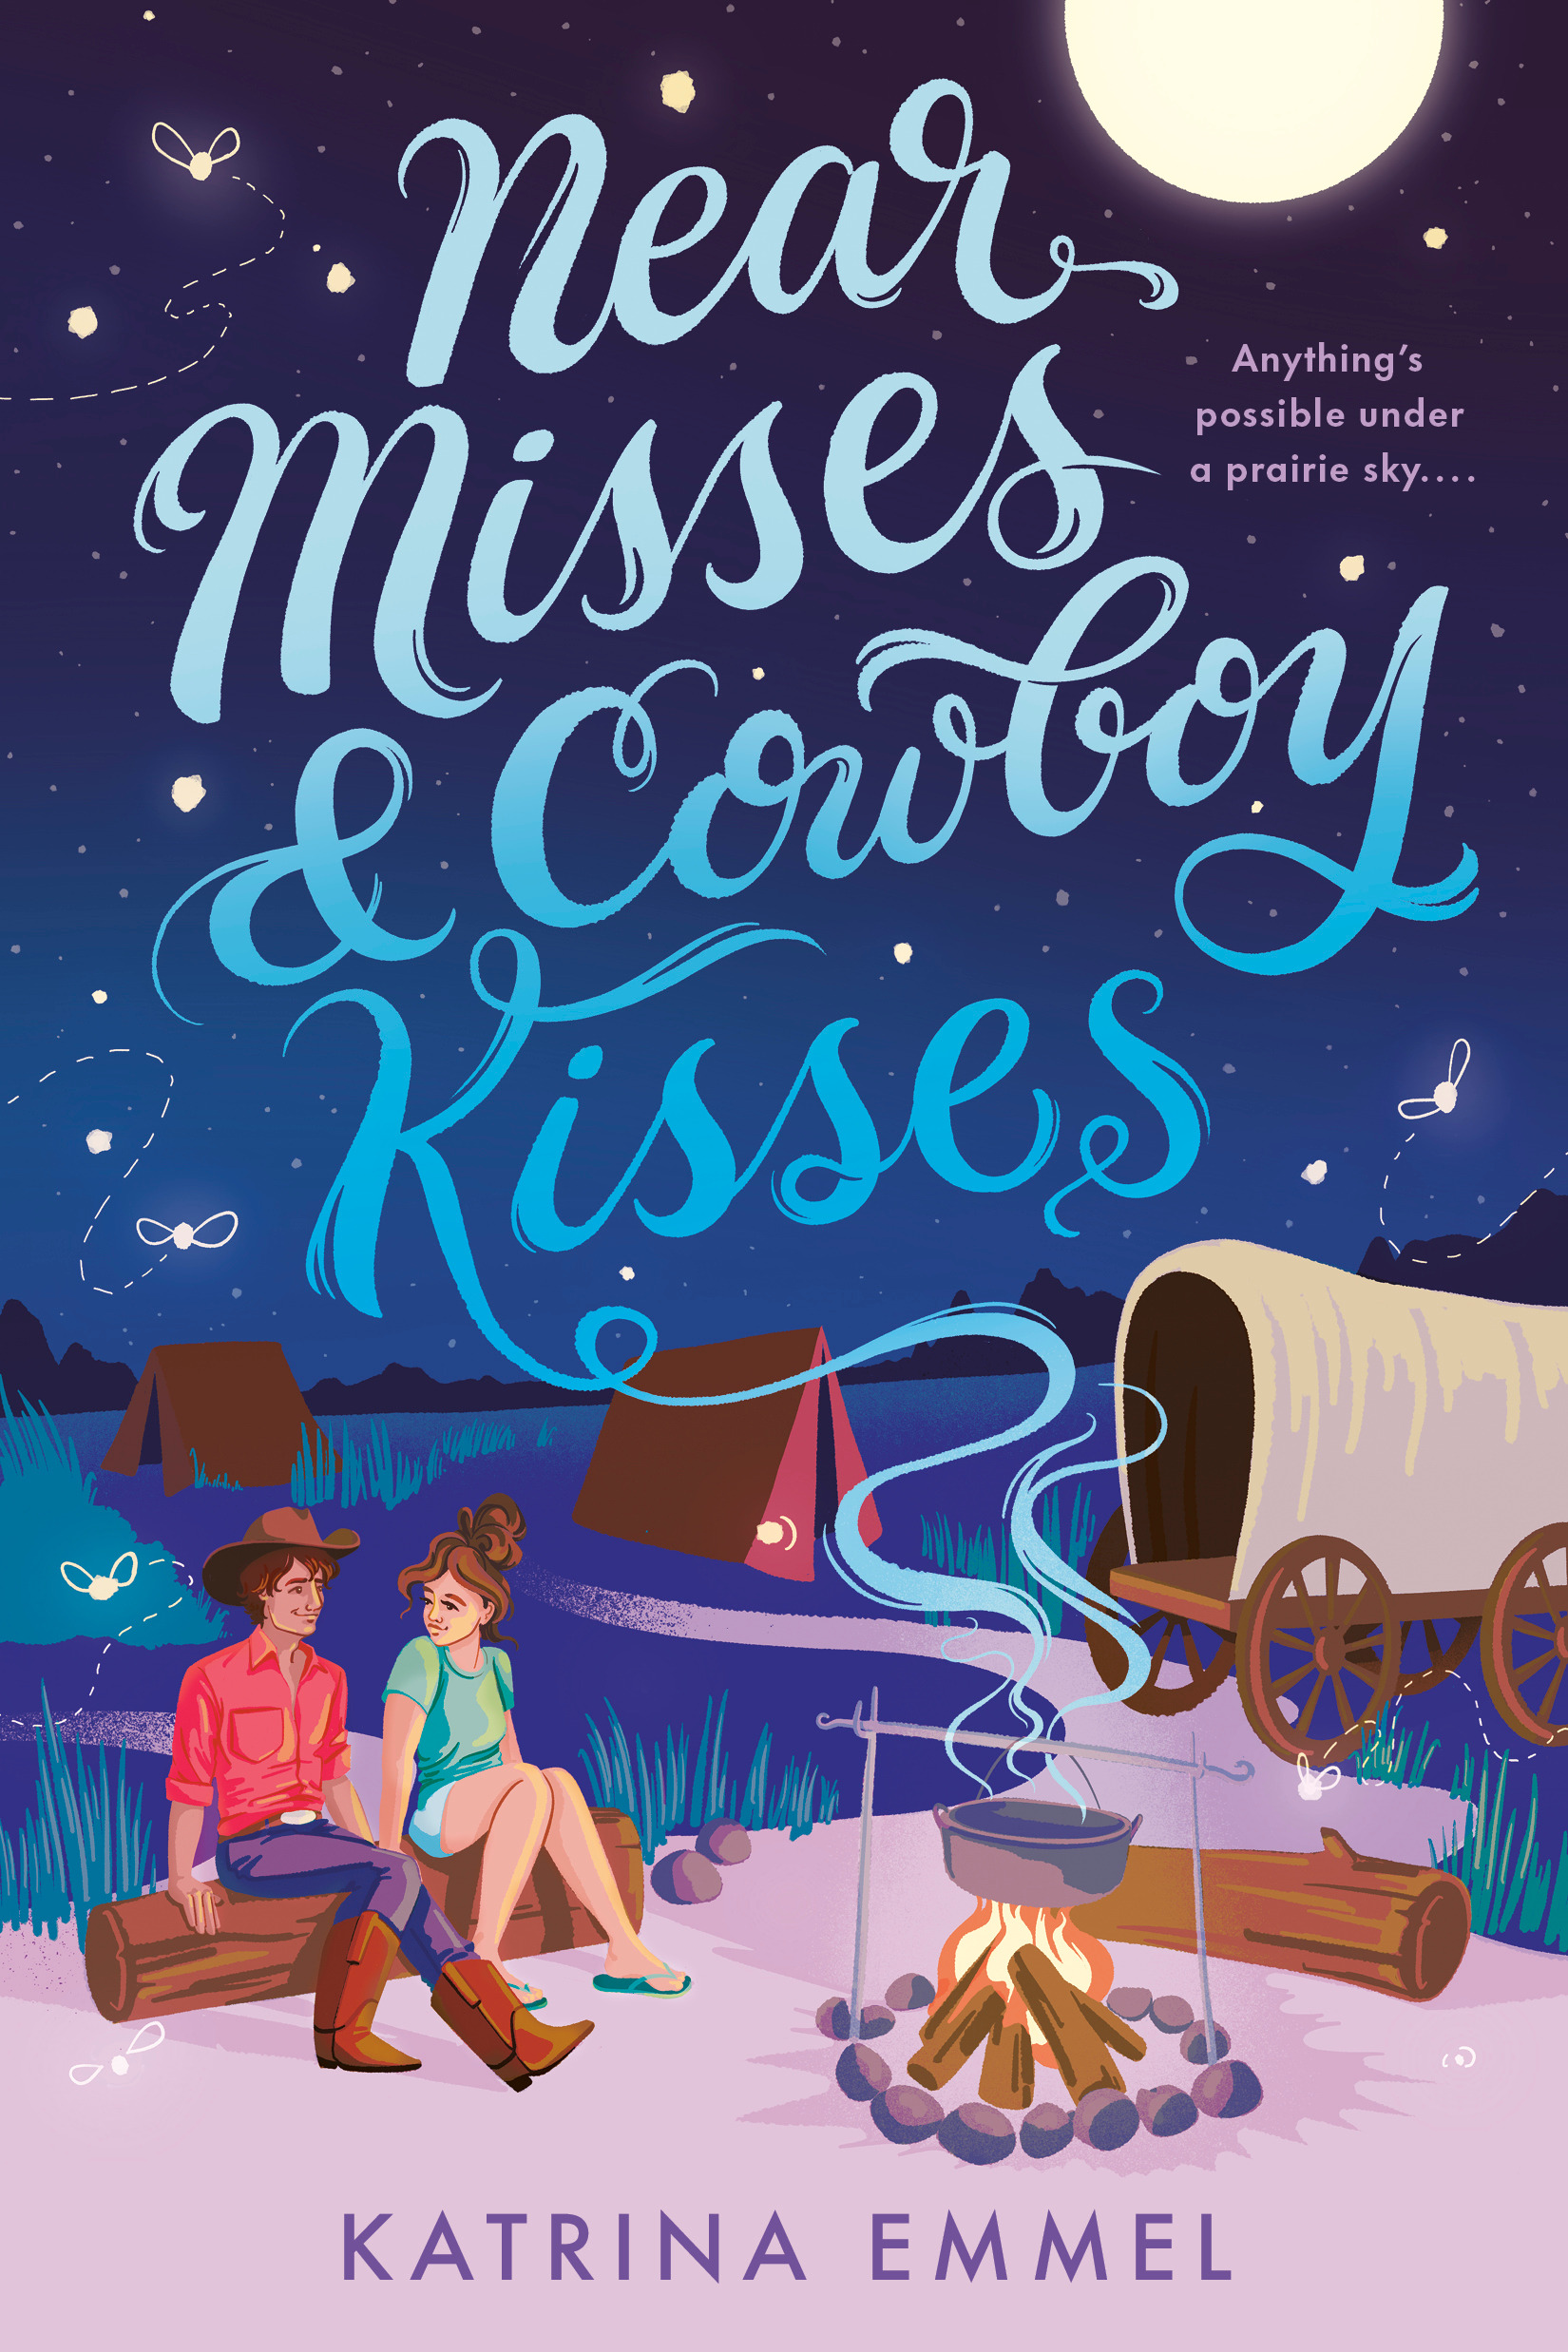 Author Chat with Katrina Emmel (NEAR MISSES & COWBOY KISSES), Plus Giveaway~ US/CAN ONLY!